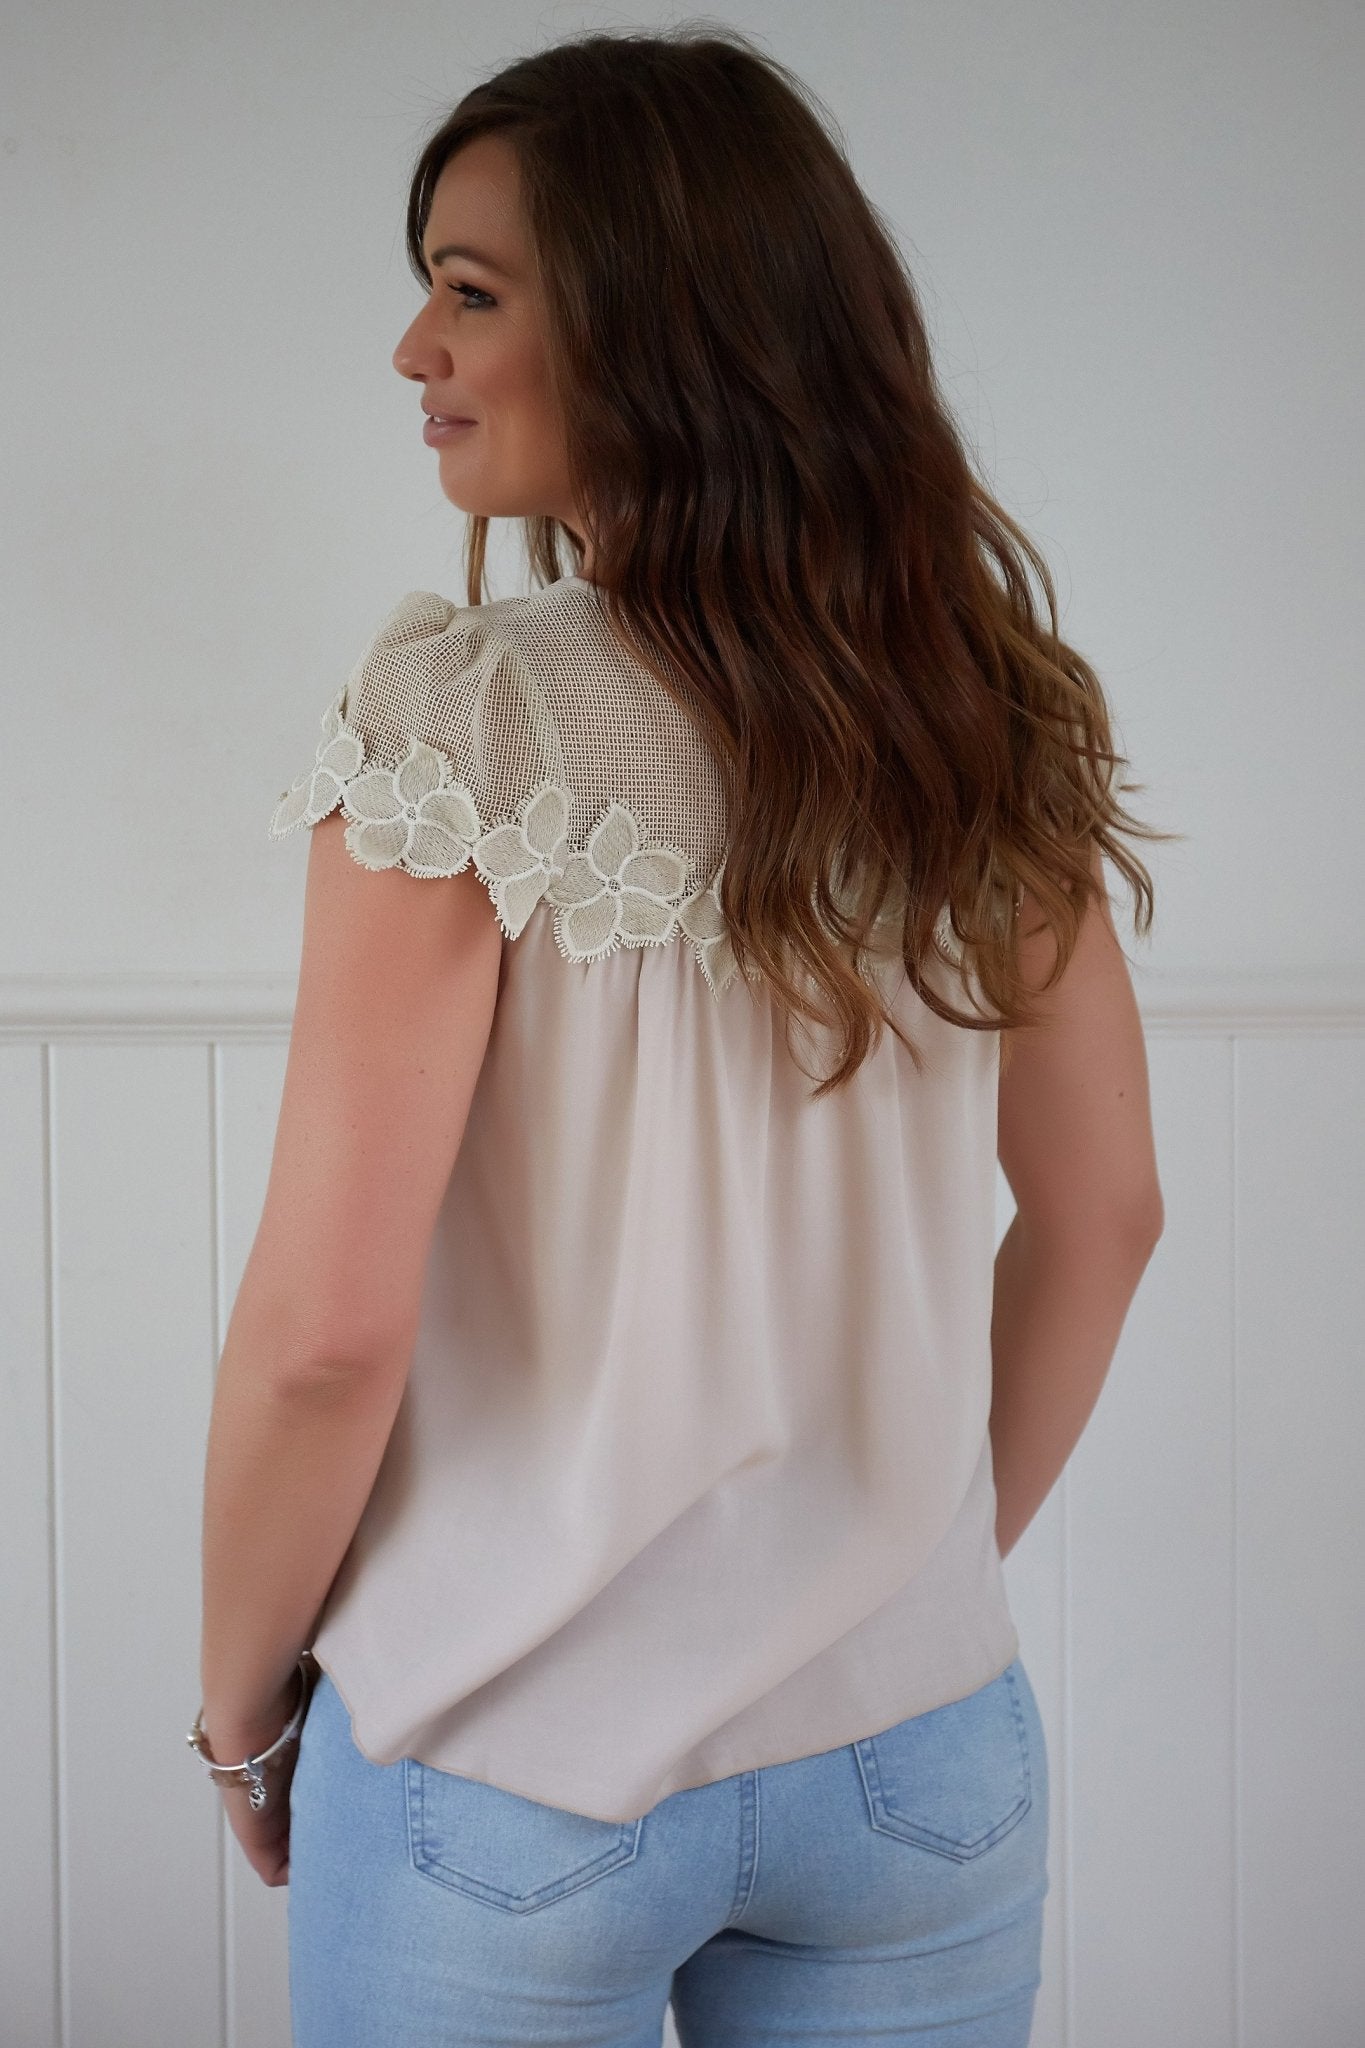 Ava Ruby Embroidered Top in Beige - Hey Sara